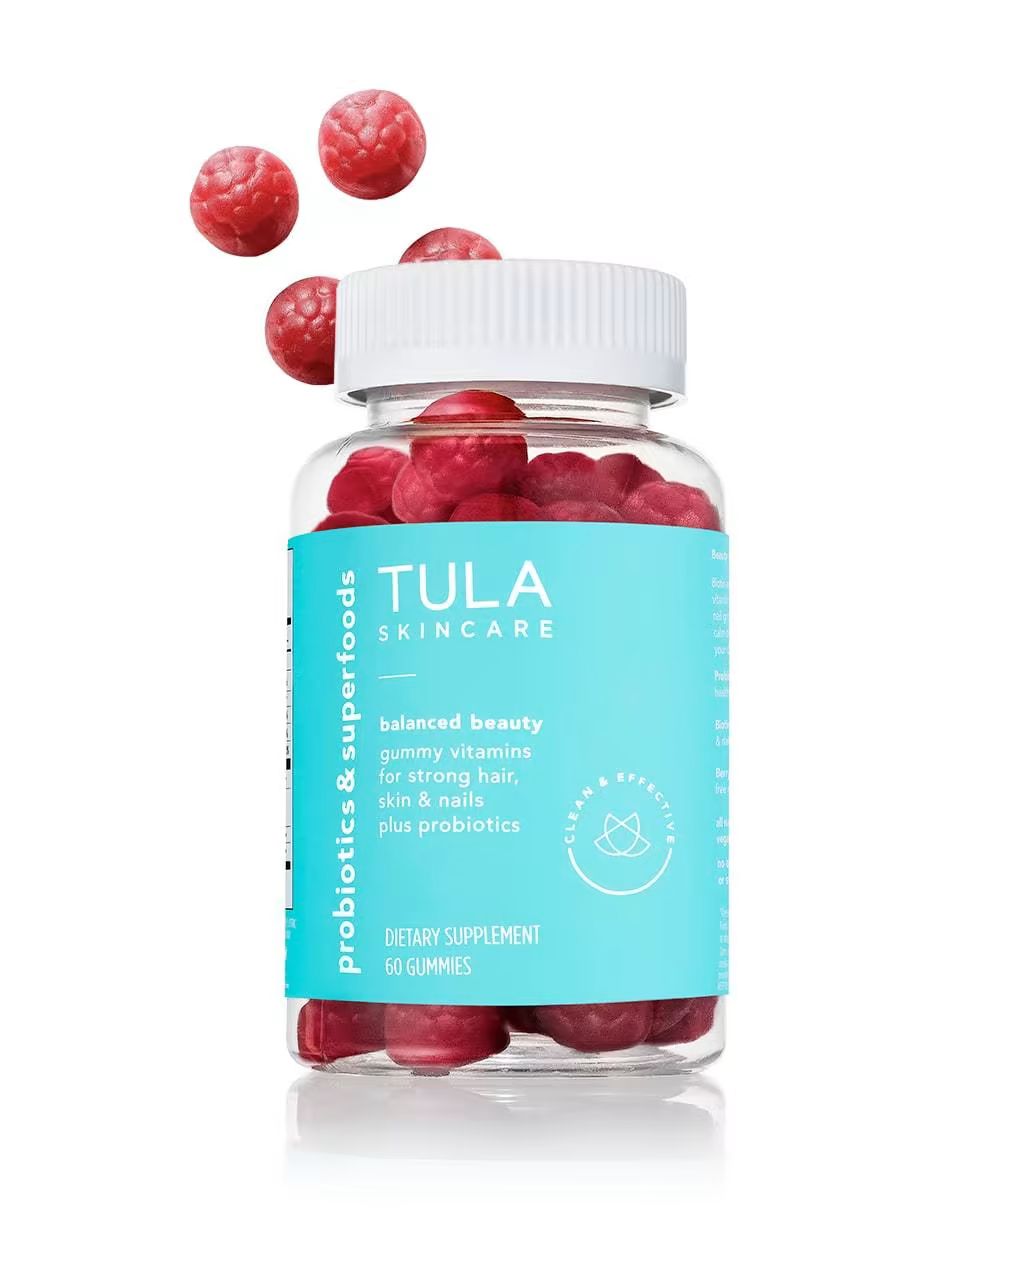 gummy vitamins for strong hair, skin &amp; nails plus probiotics (60 count) | Tula Skincare